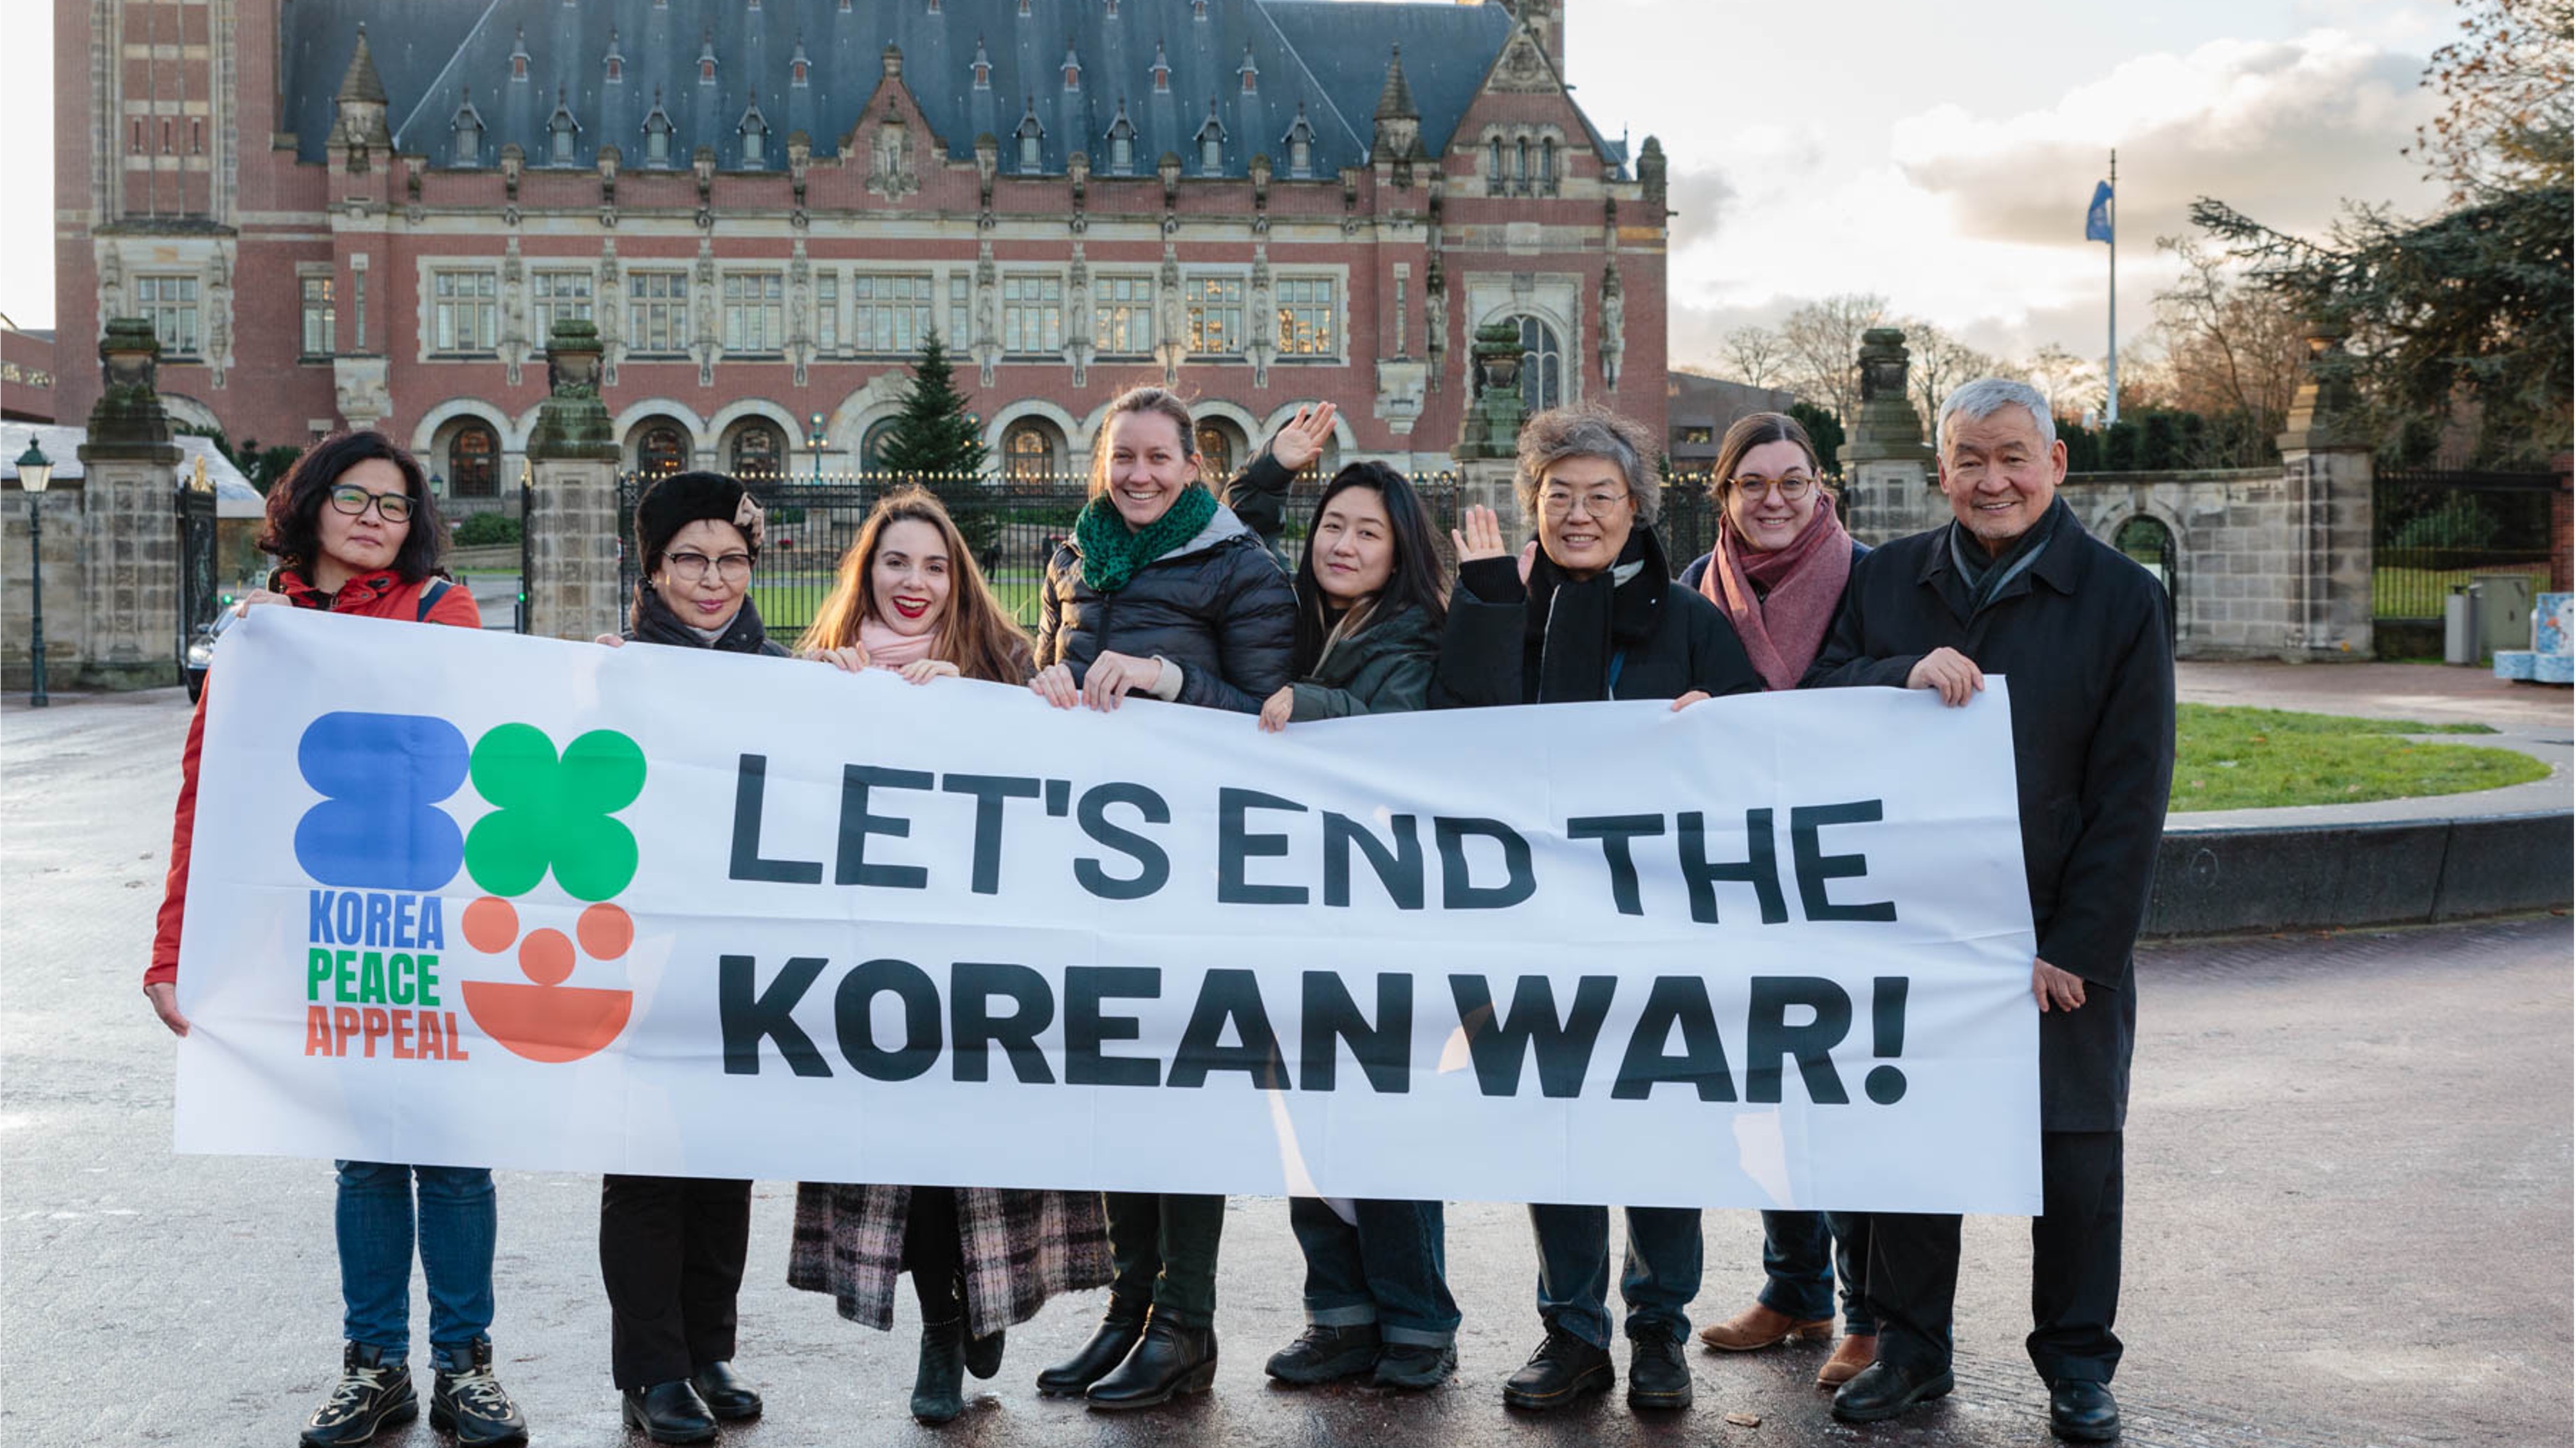 It's time for peace on the Korean Peninsula